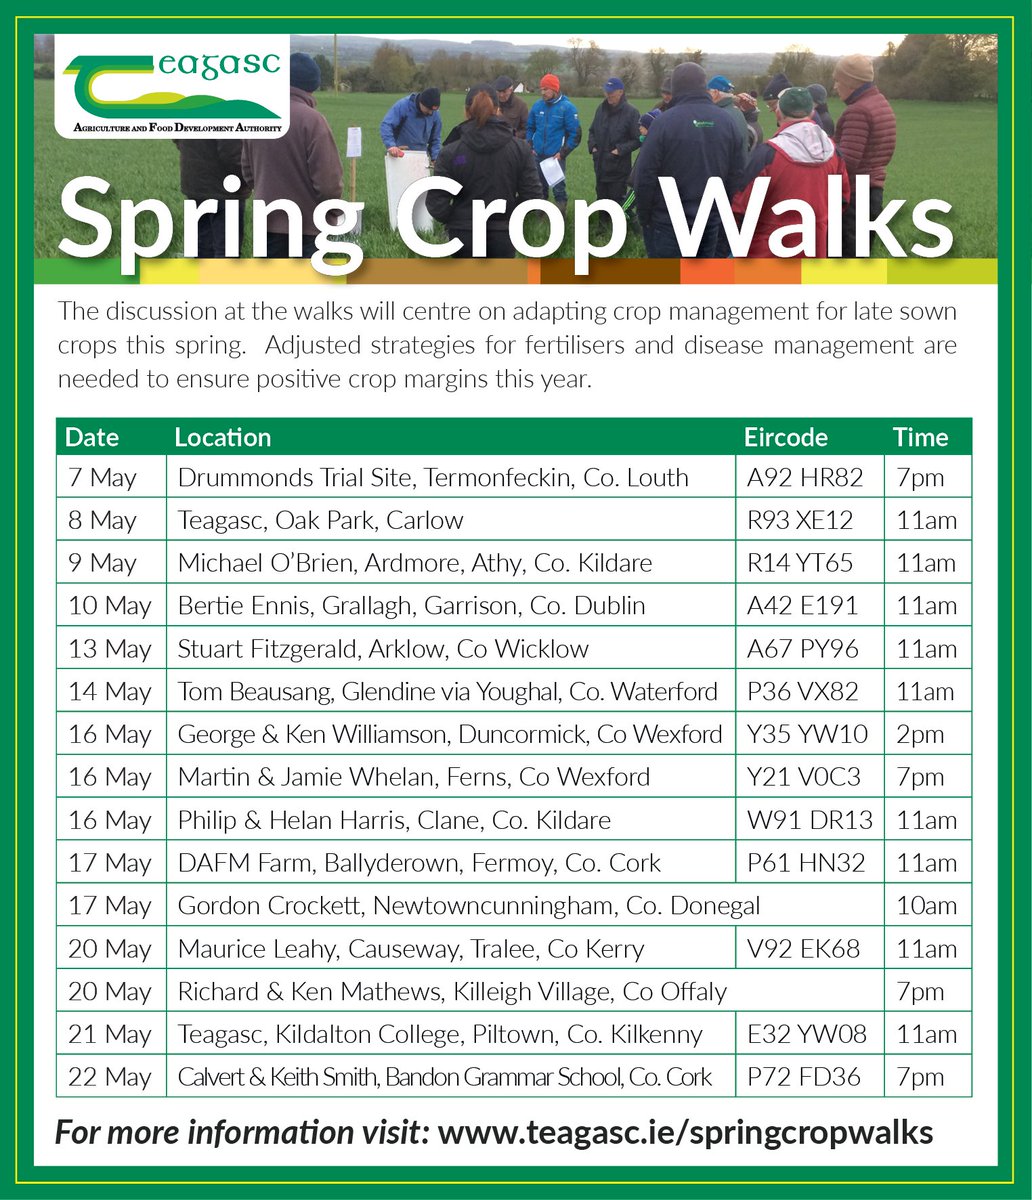 The @TeagascCrops team are hosting a series of Spring Crop Walks across the country. Attendees will hear how adjusted strategies for fertilisers and disease management are needed to ensure positive crop margins this year. Find out more teagasc.ie/springcropwalks